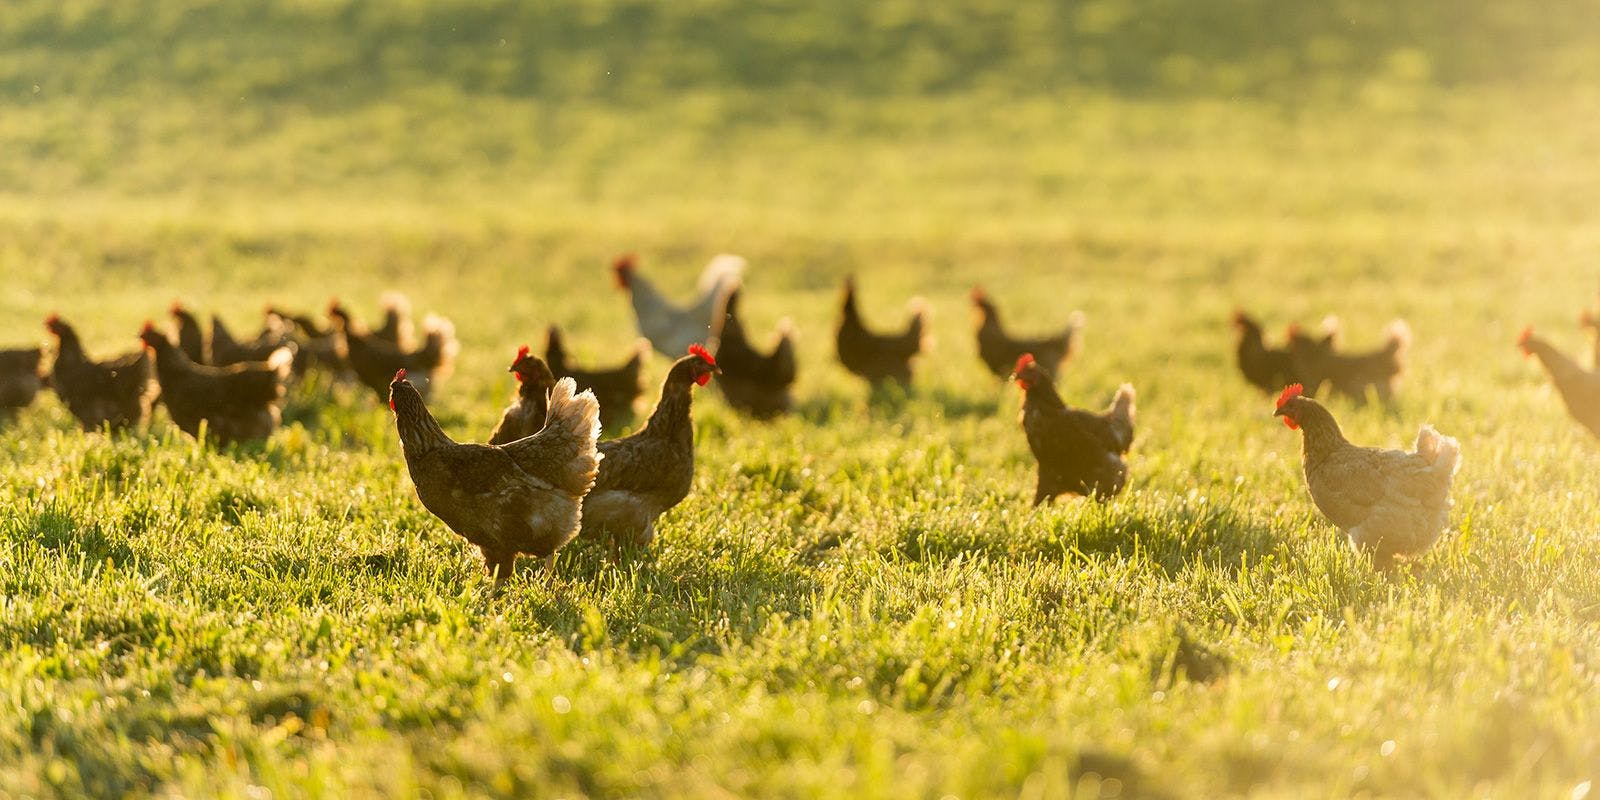 Hens on pasture in the evening sun on the Stoltzfoos family farm in Pennsylvania.